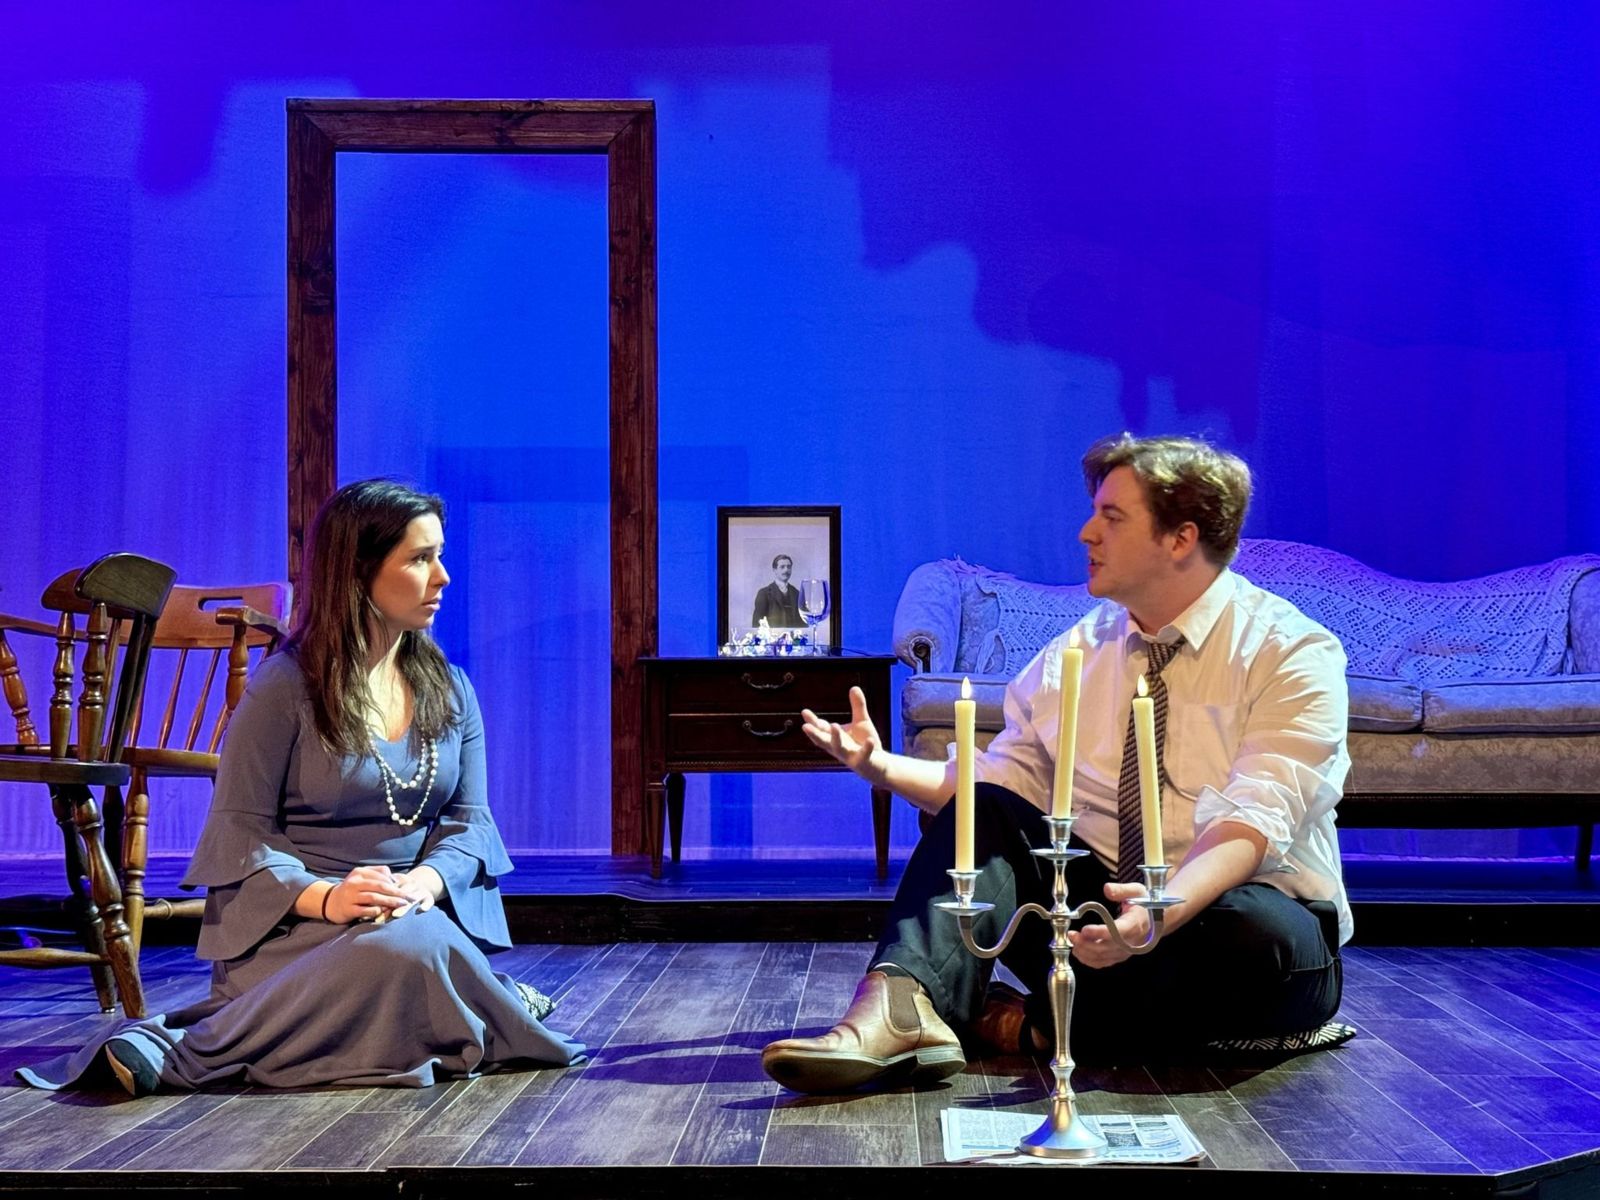 Kadin Gradner and Azya Elrod rehearse their roles as “Jim” and “Laura” in Gadsden State’s production of “The Glass Menagerie.”